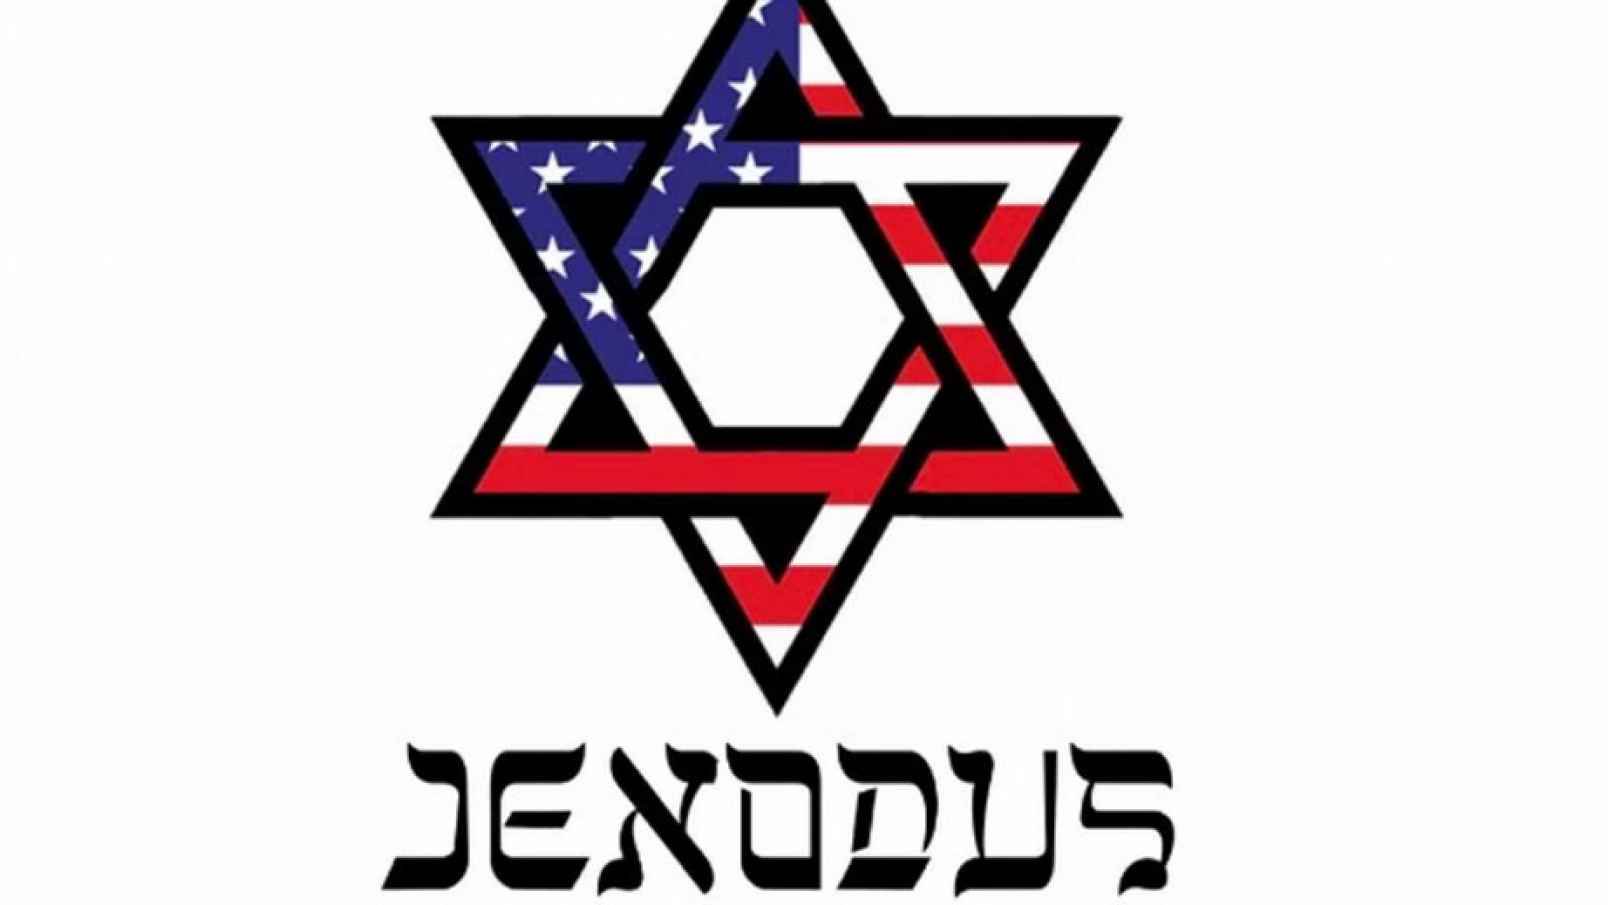 The Jexodus symbol and legend, a response to the anti-Semitism in the Democratic Party. But will massive aliya overtake a mere exist from the left?